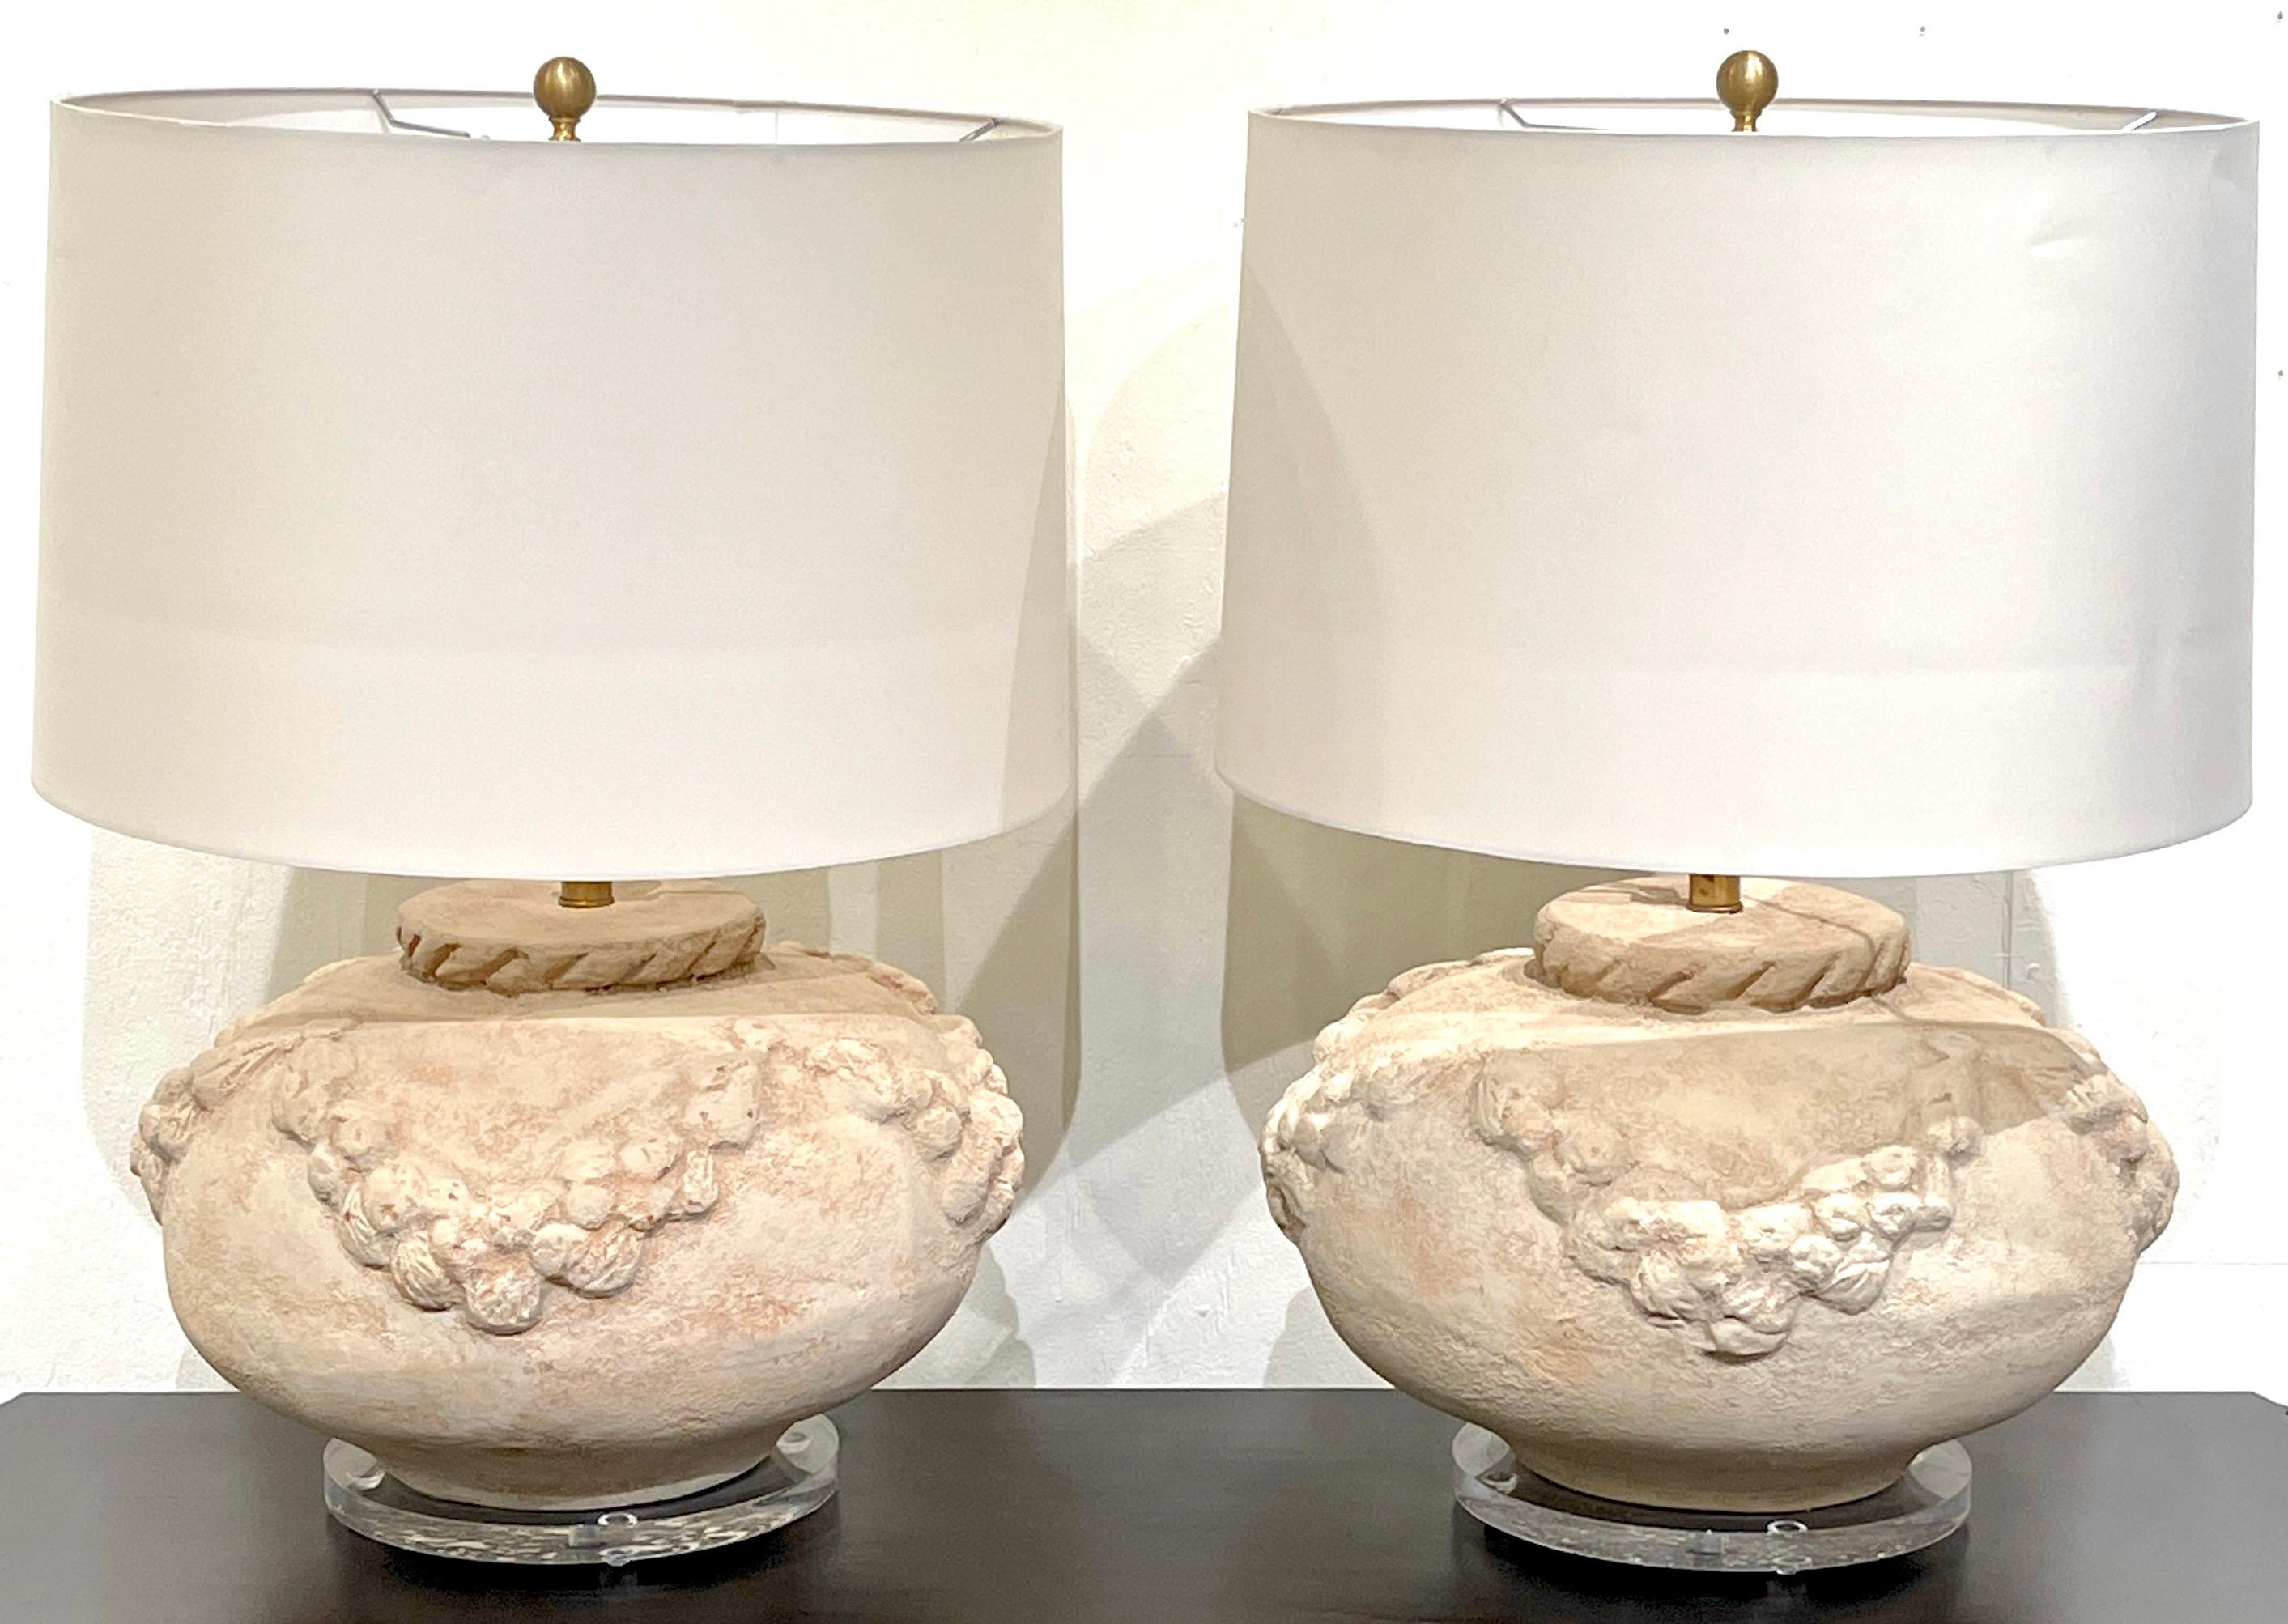 Pair of Large Scale Italian Neoclassical Terracotta & Lucite lamps 
Italy, Circa 1980s

Each one a substantial a substantial vase decorated with a continuous garland, raised on a 10-Inch diameter lucite pedestal base. Shown with 19-Inch diameter